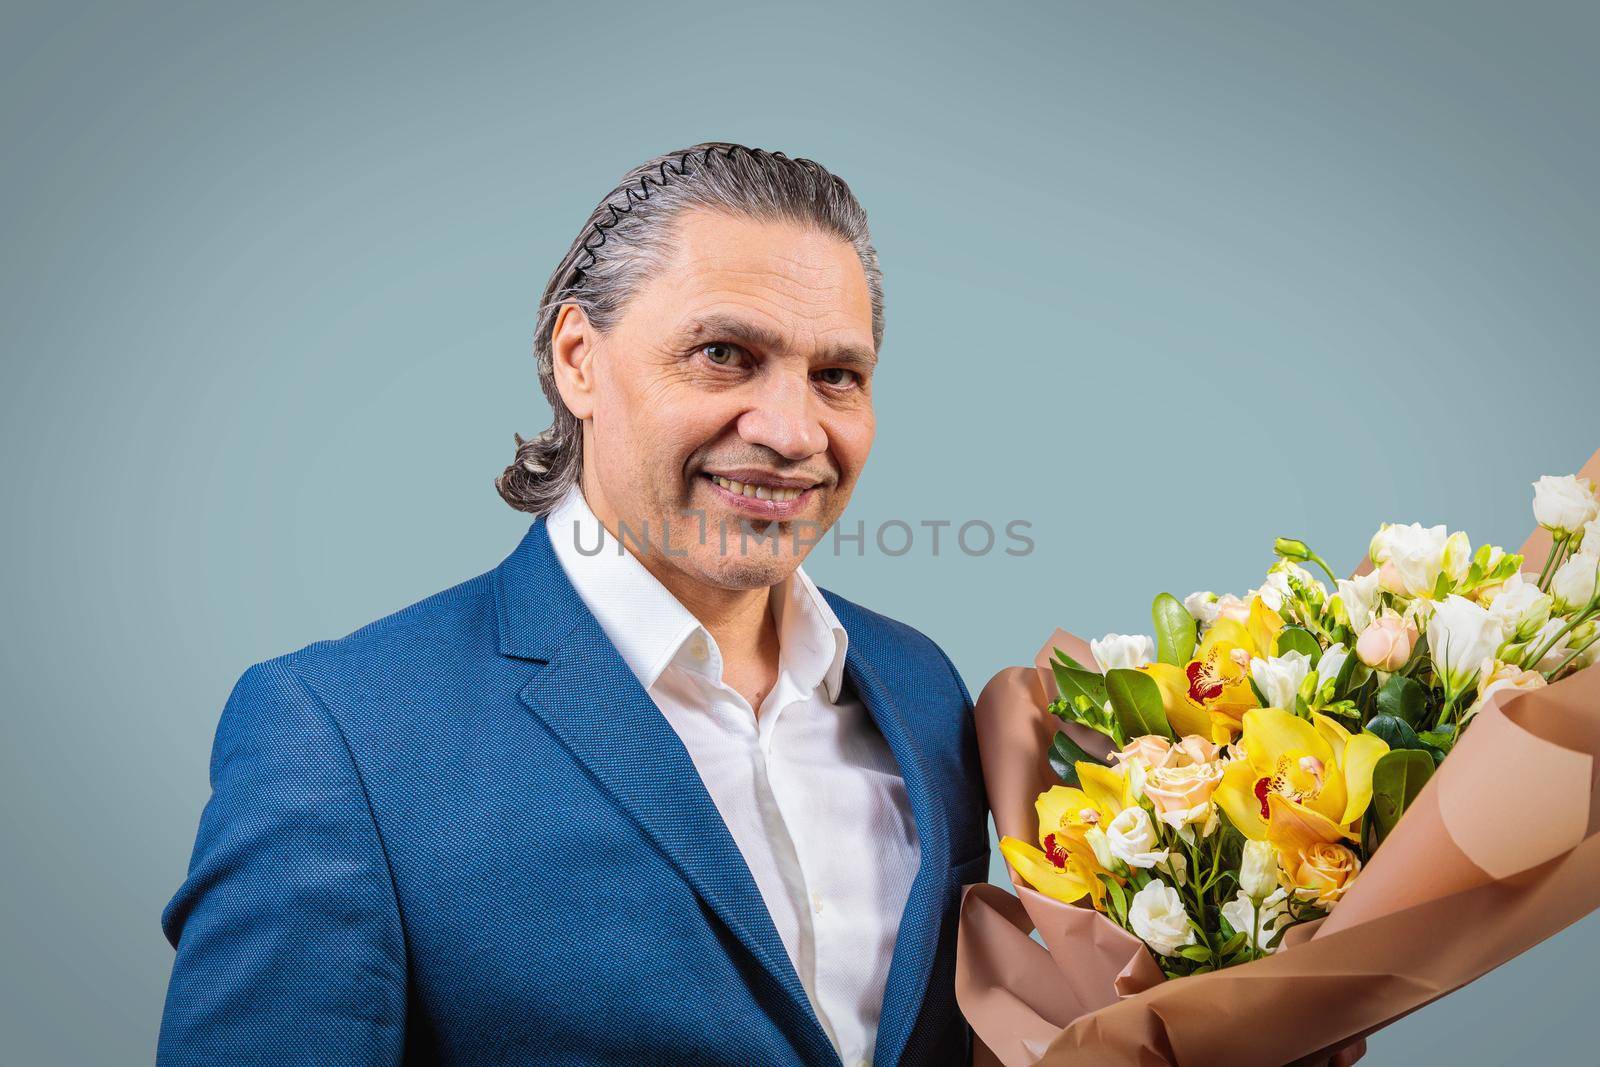 Smiling 50 year old man in suit with bouquet of flowers by Yurich32